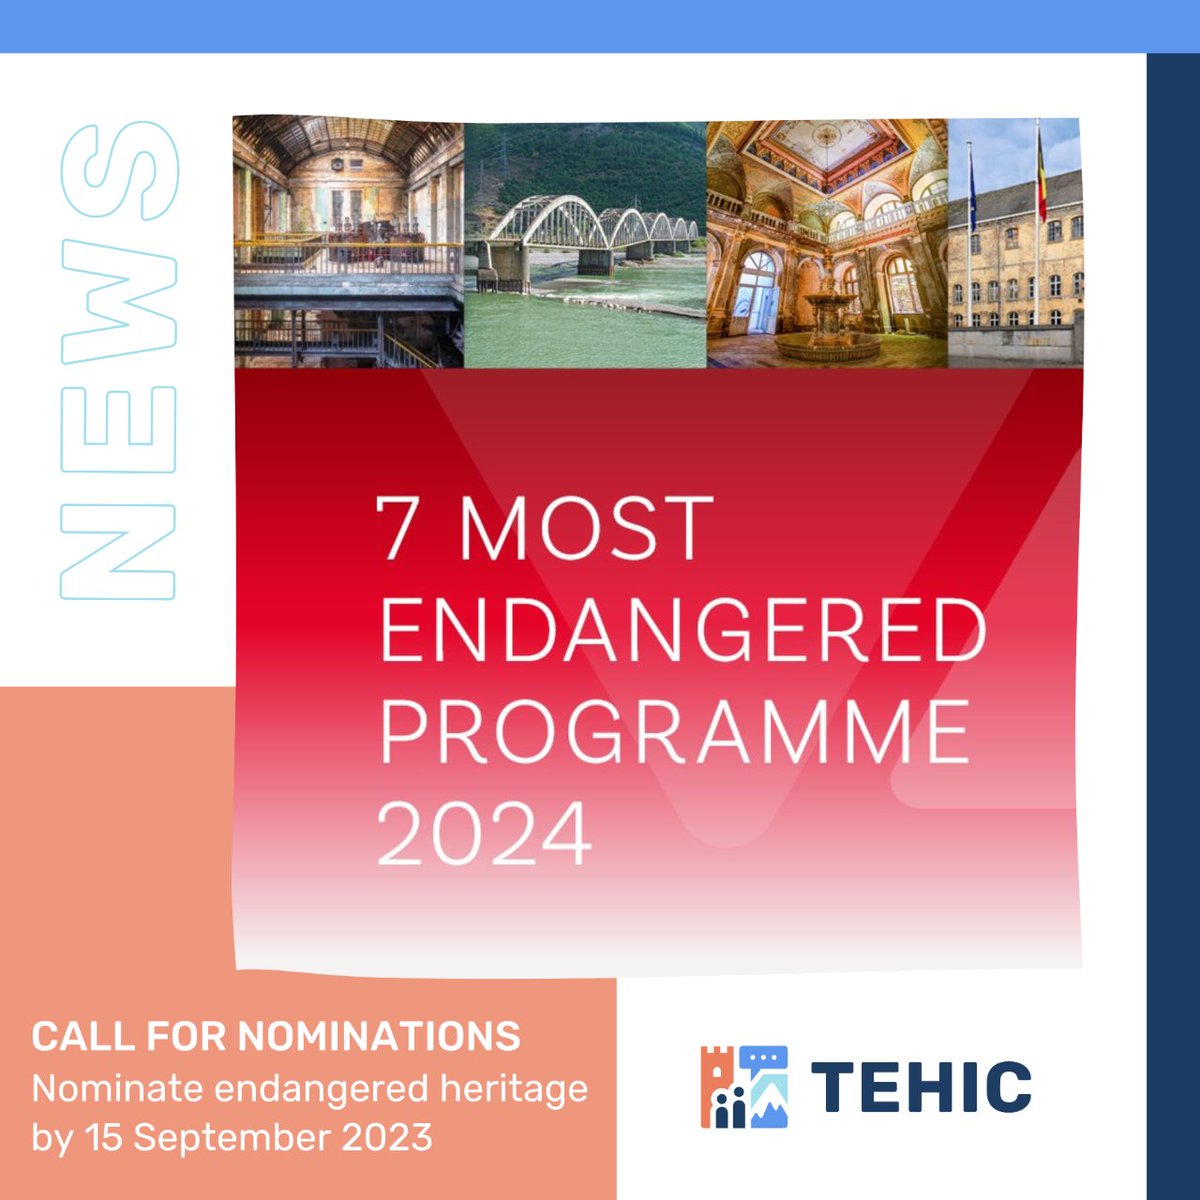 Saving our heritage is in our hands!

Don't forget that the call for nominations for the @europanostra's #7MostEndangered Programme 2024 is open until 15th September 2023.

ℹ️ bit.ly/7-Most-Endange…

@IAPHpatrimonio @SveucilisteZG